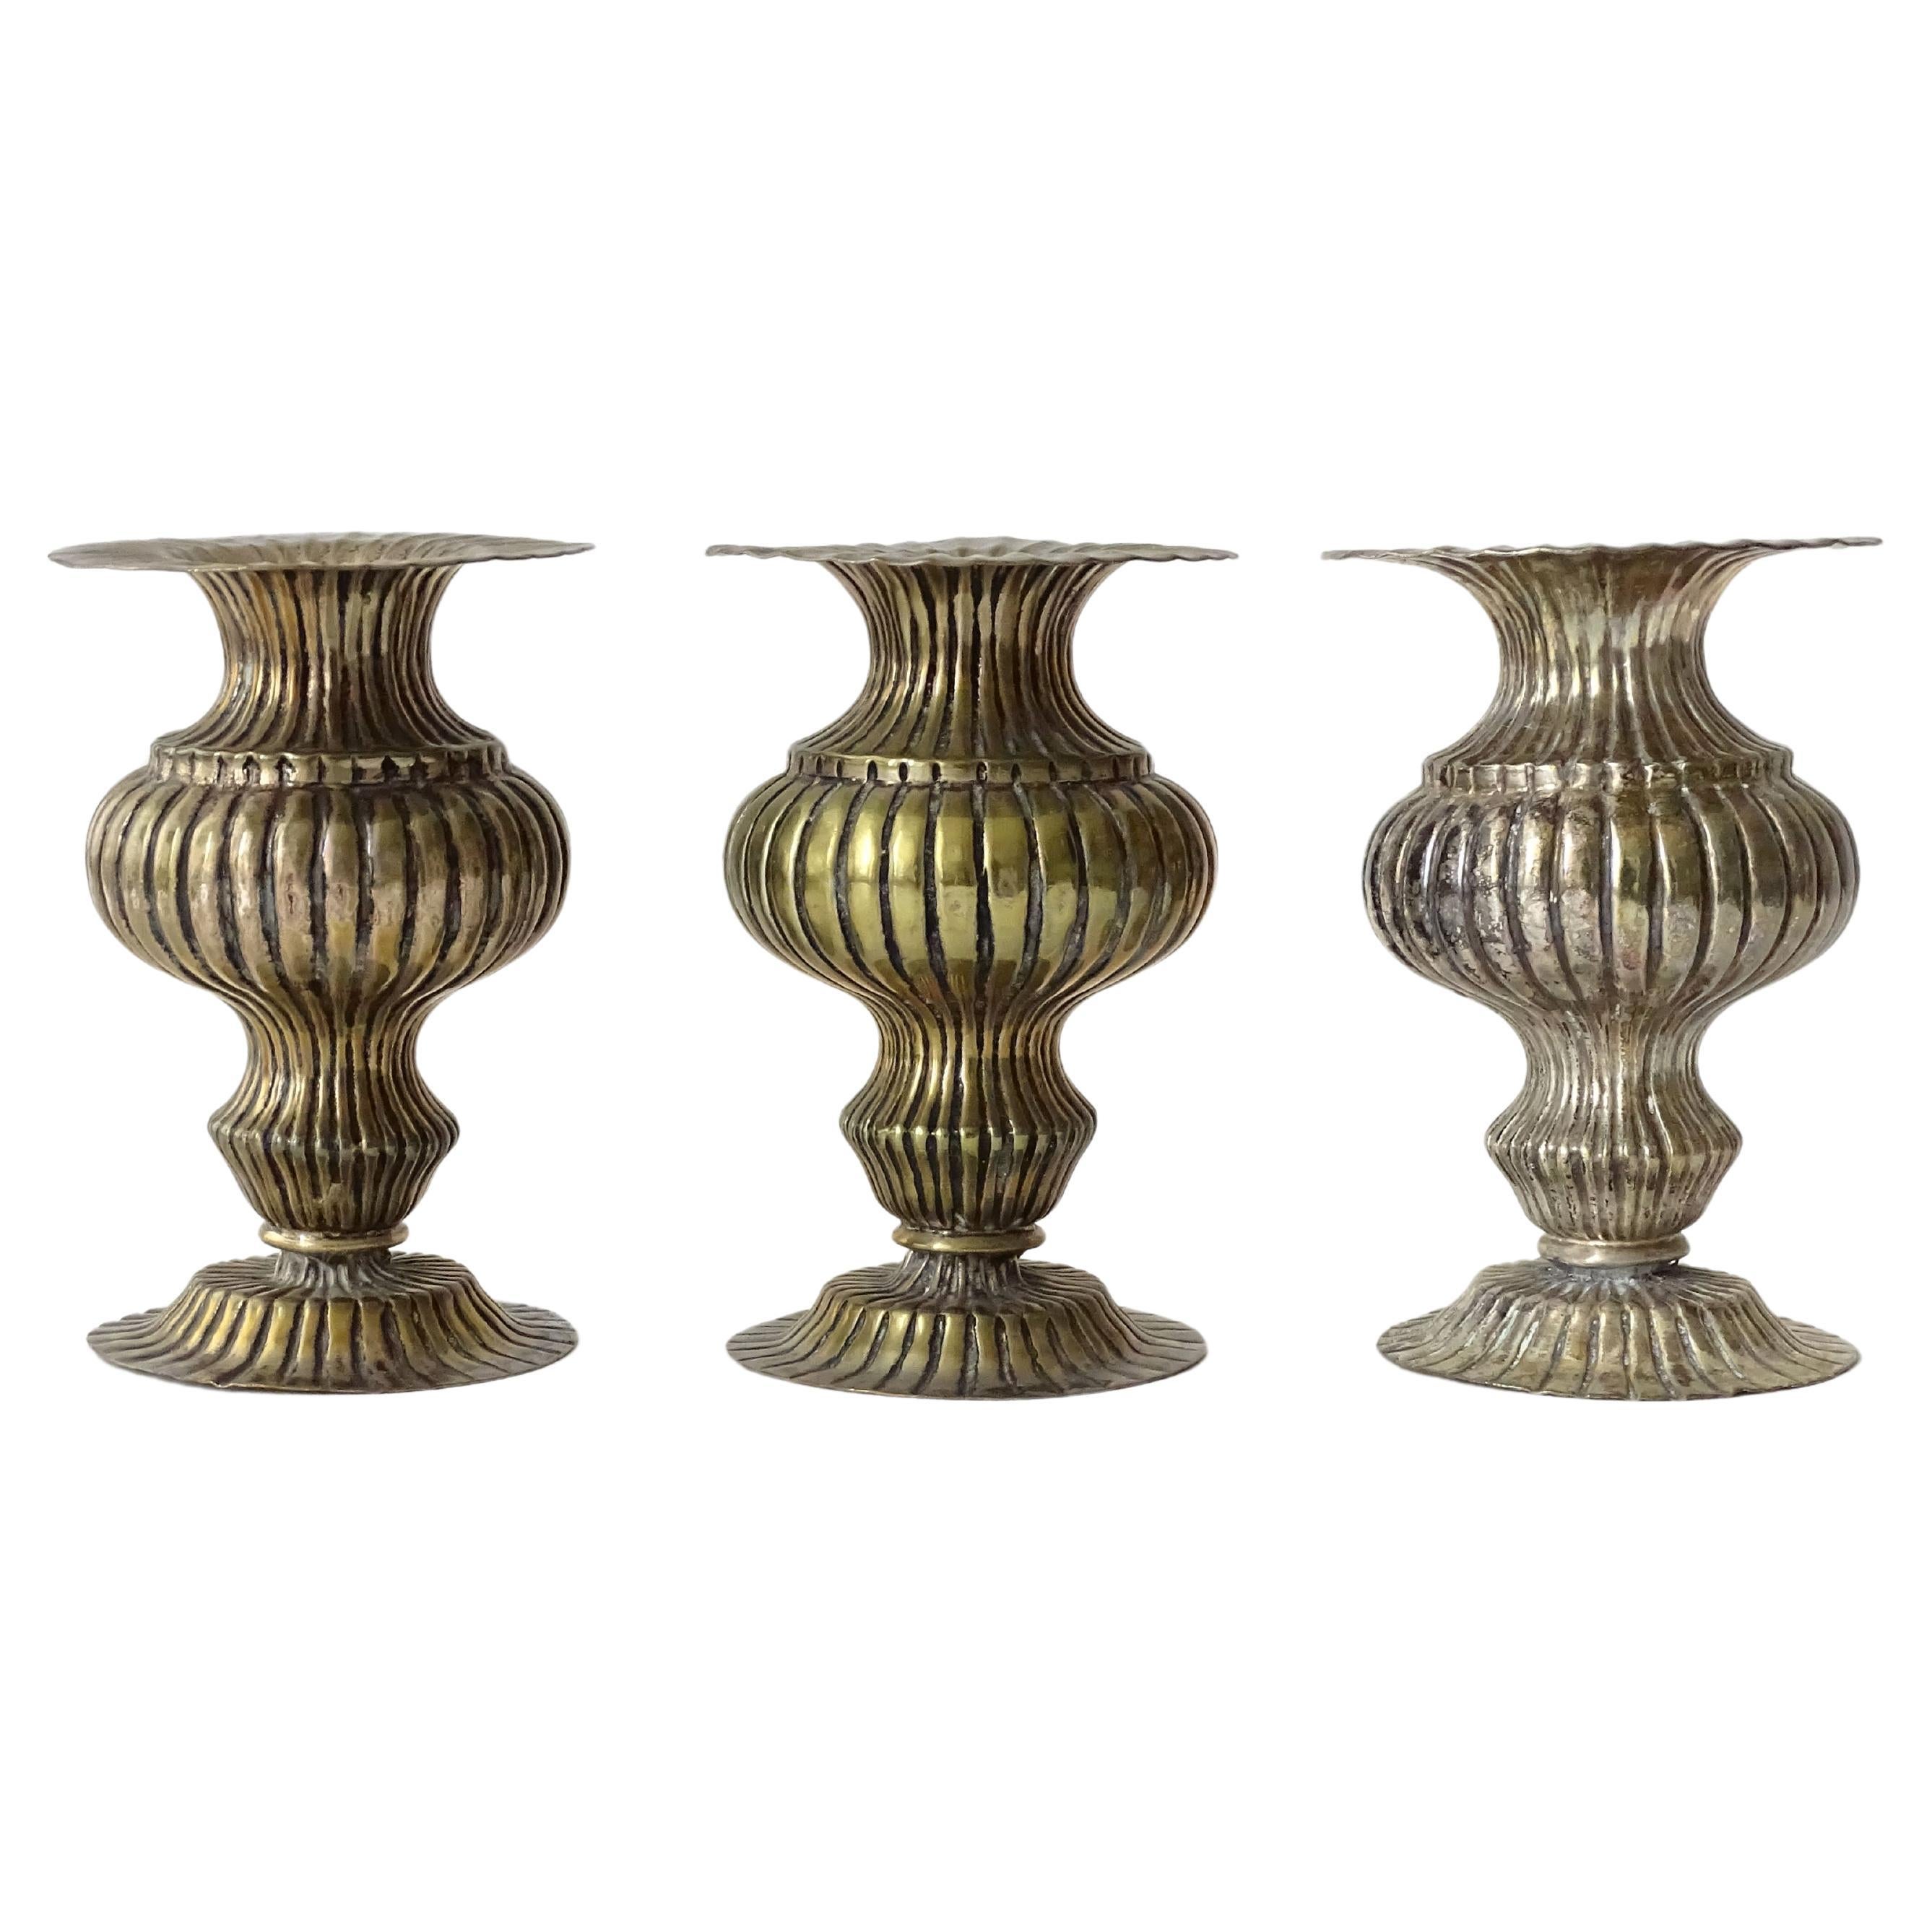 Three Small Antique Silverplate Soliflor Vases, Italy 1920s For Sale